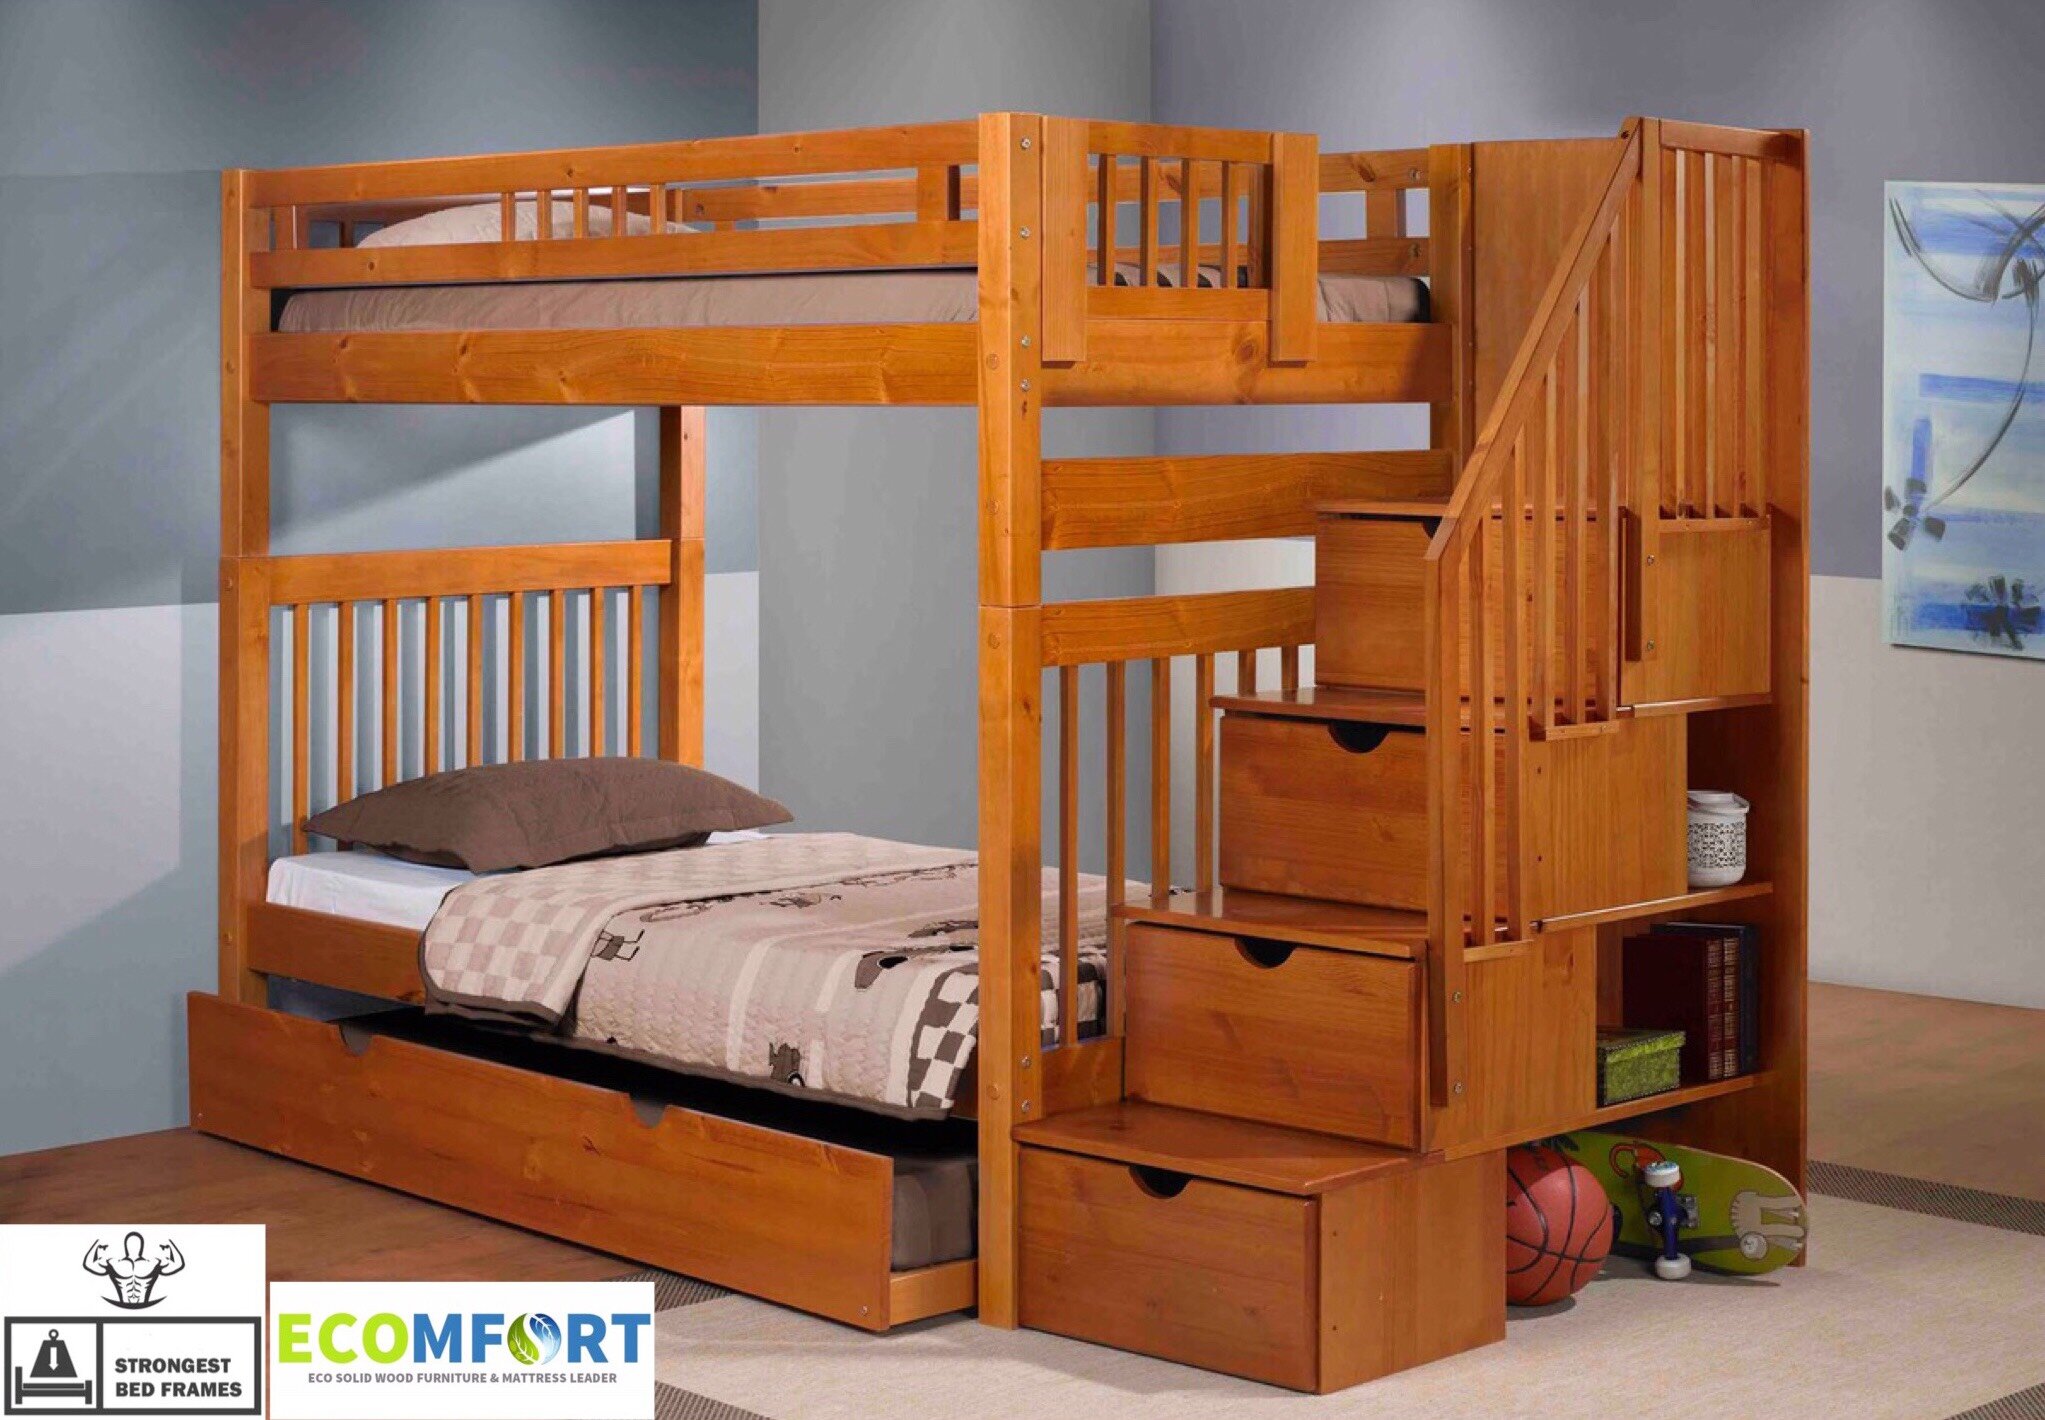 wood bunk beds for sale